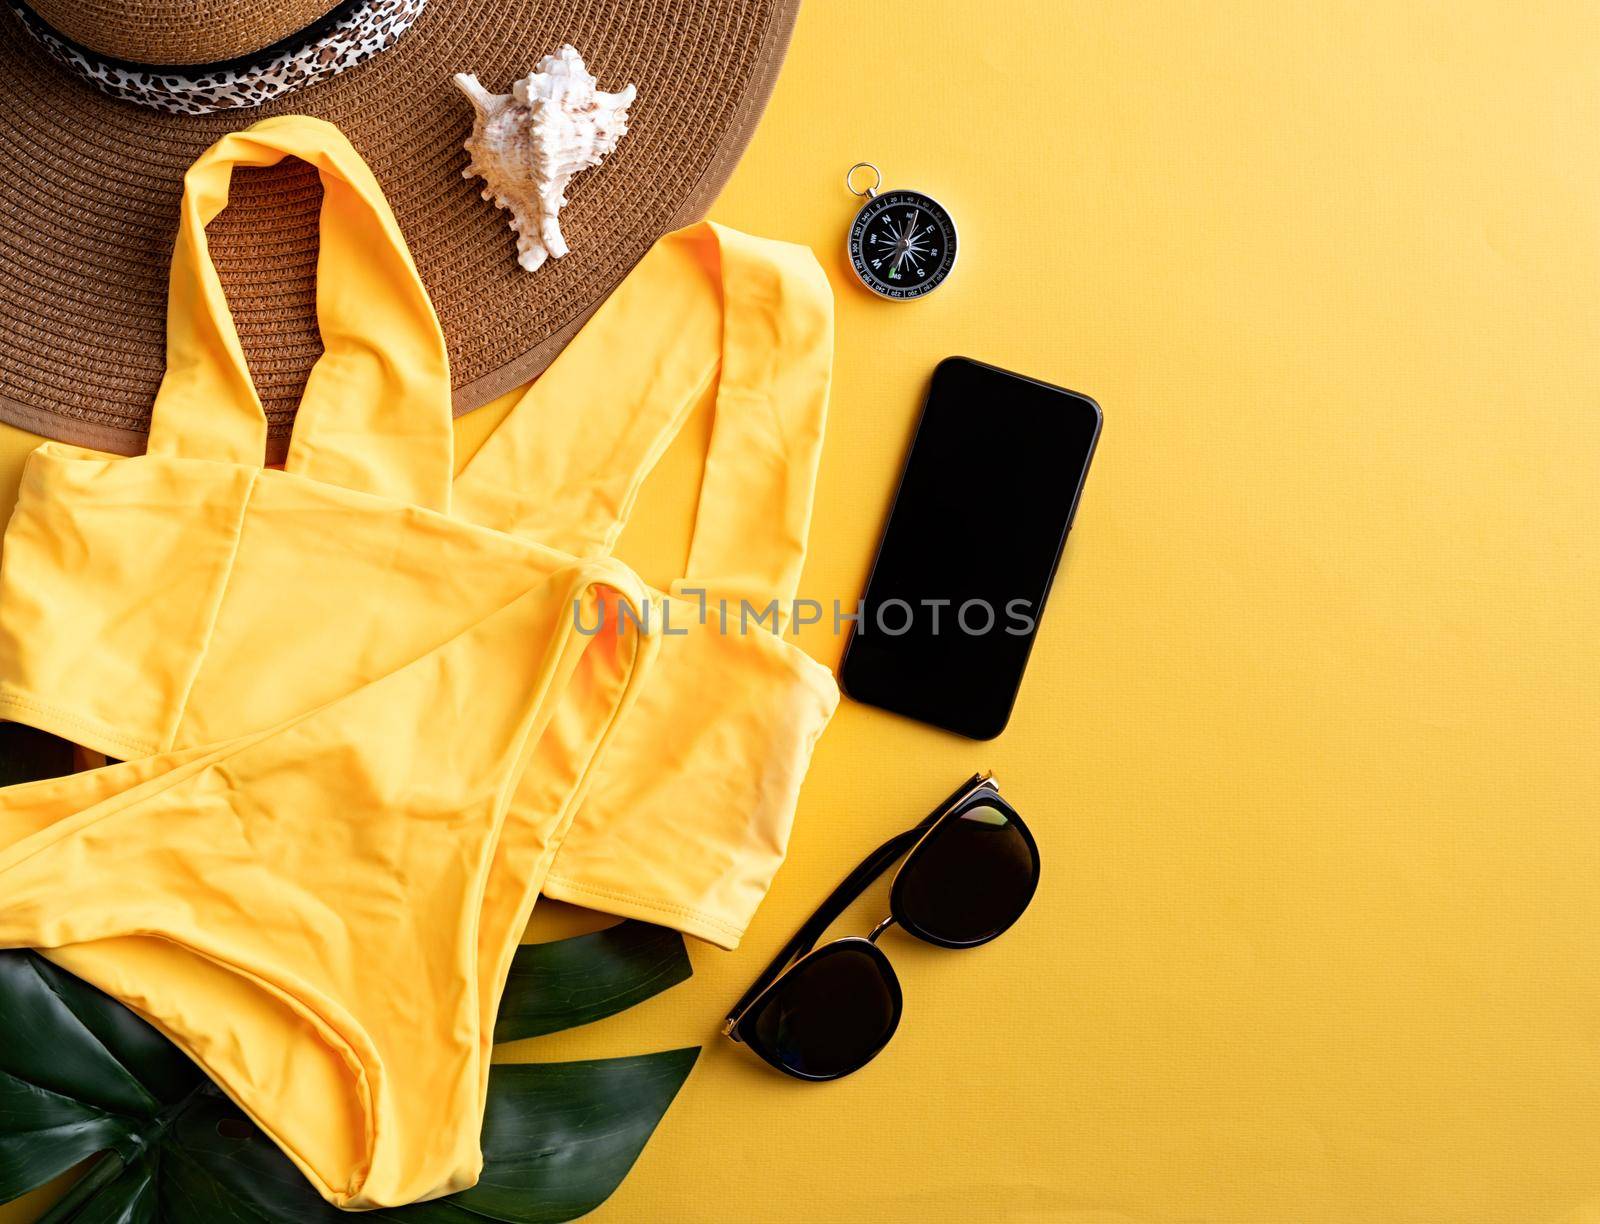 Travel and adventure. Flat lay travelling gear with swimsuit, smartphone, sunglasses and compass on yellow background with copy space